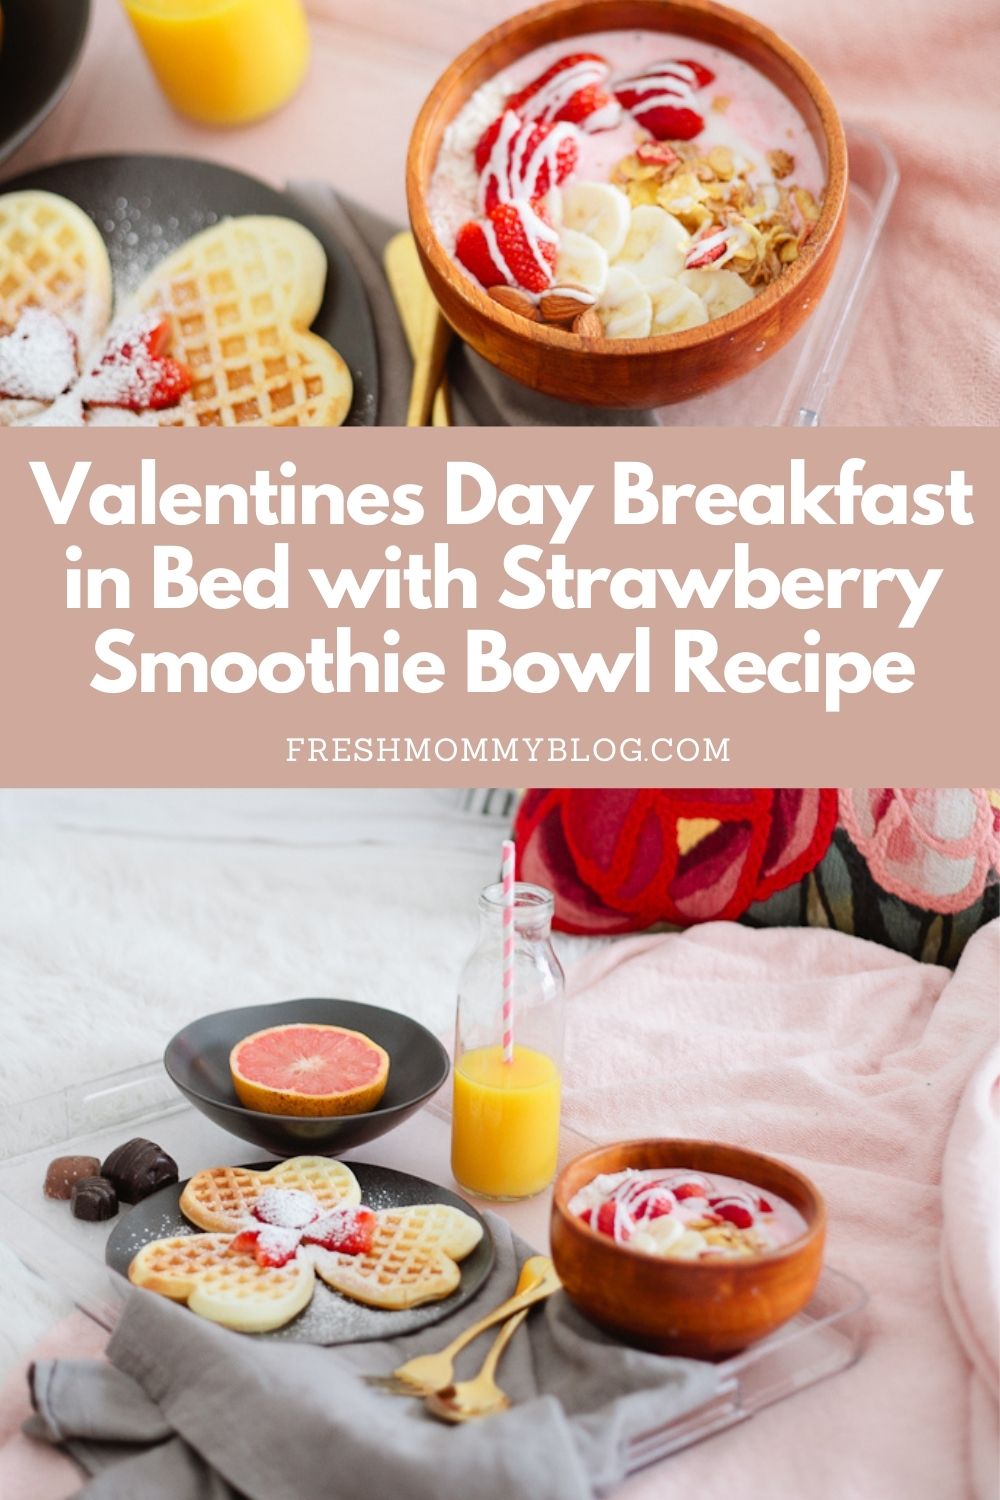 Valentines Day Breakfast in Bed with Strawberry Smoothie Bowl Recipe by popular Florida lifestyle blogger Fresh Mommy Blog